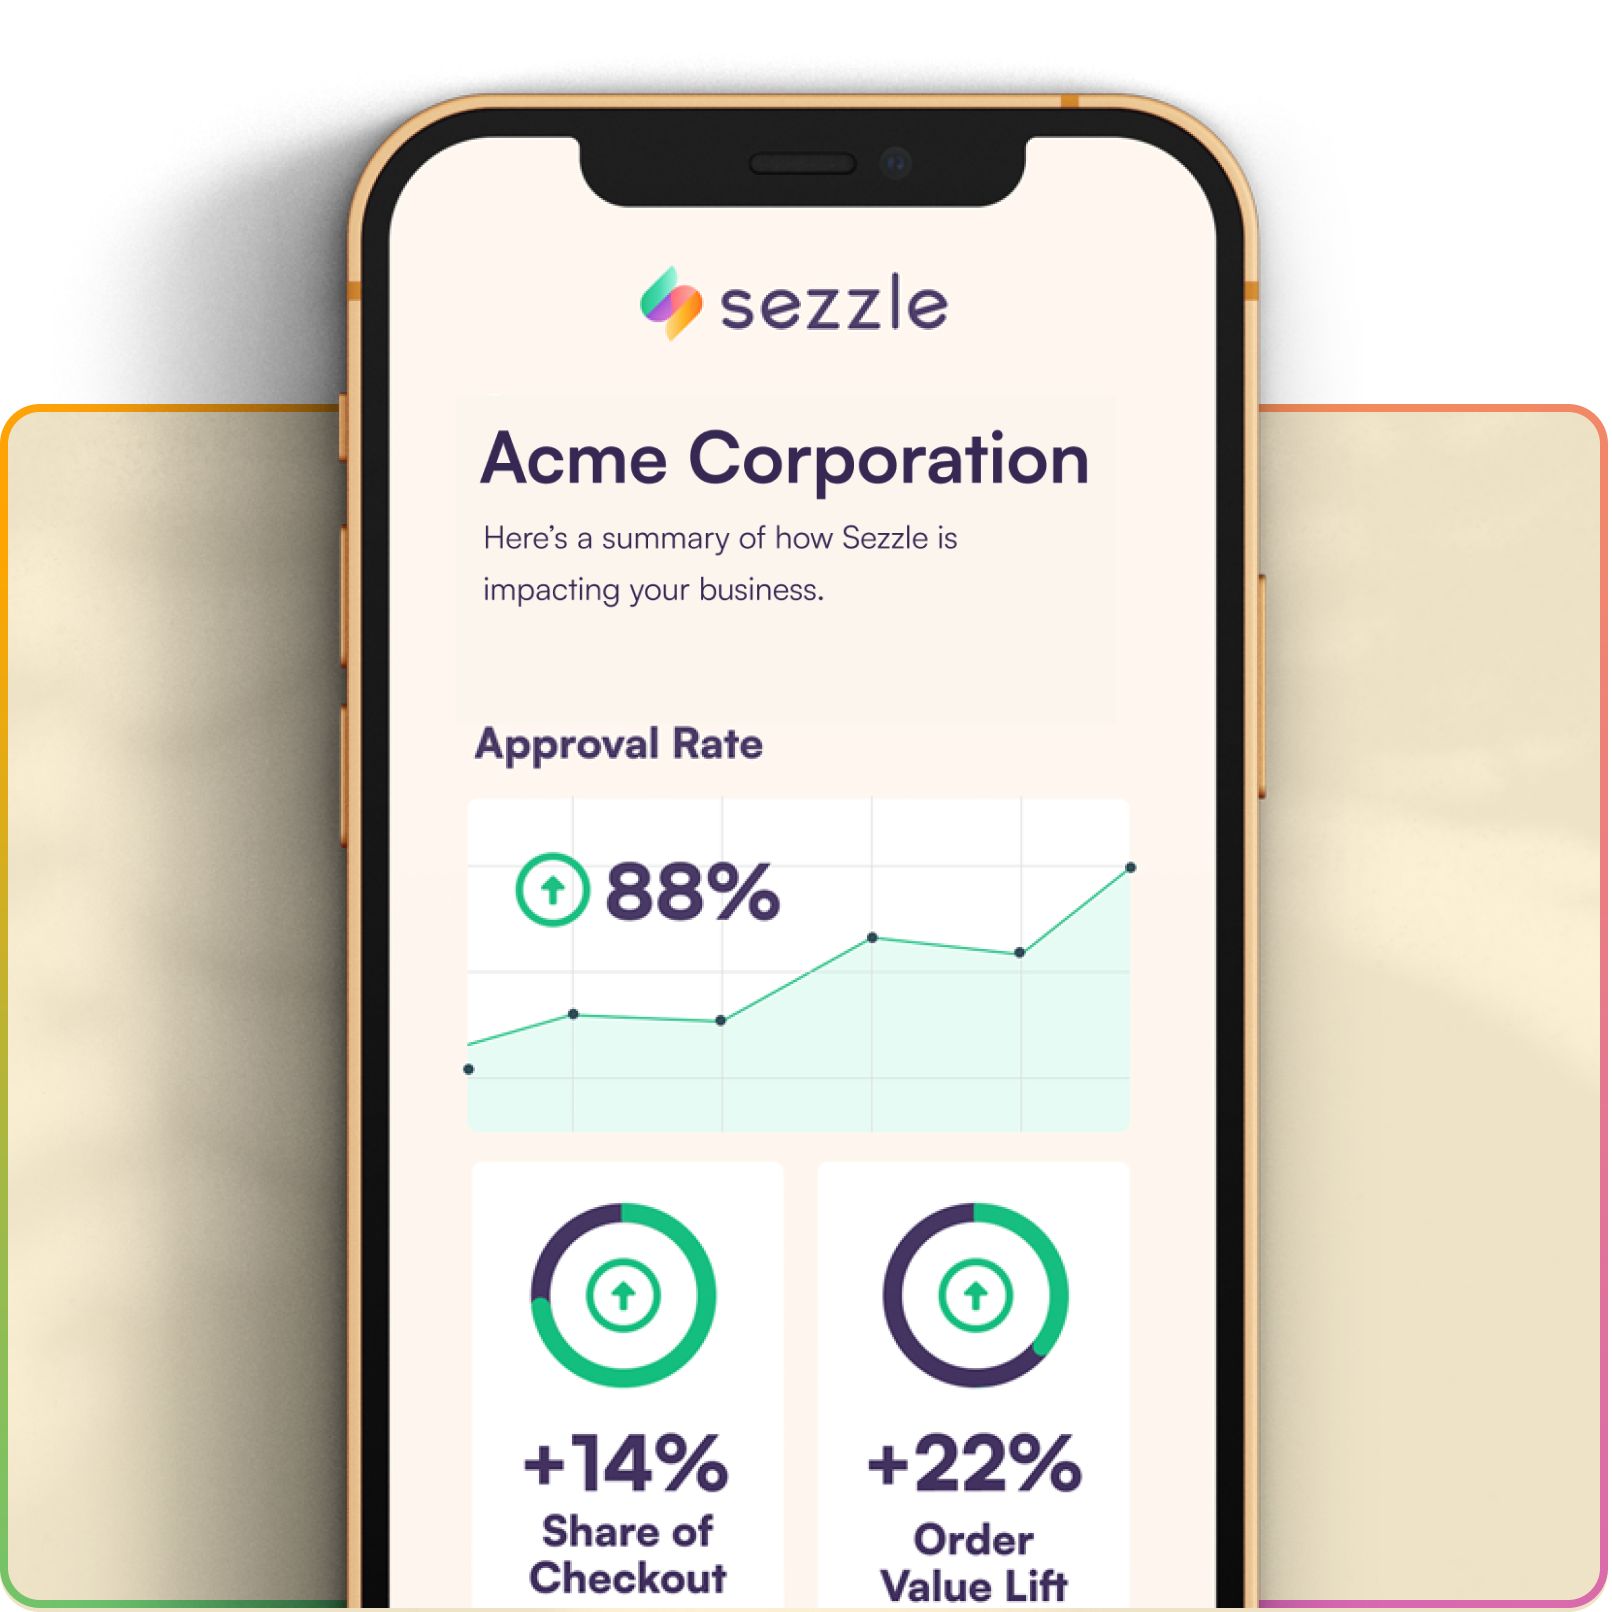 Typical Sezzle merchants see an 88% approval rate, 14% share of checkout, and a 22% order value lift